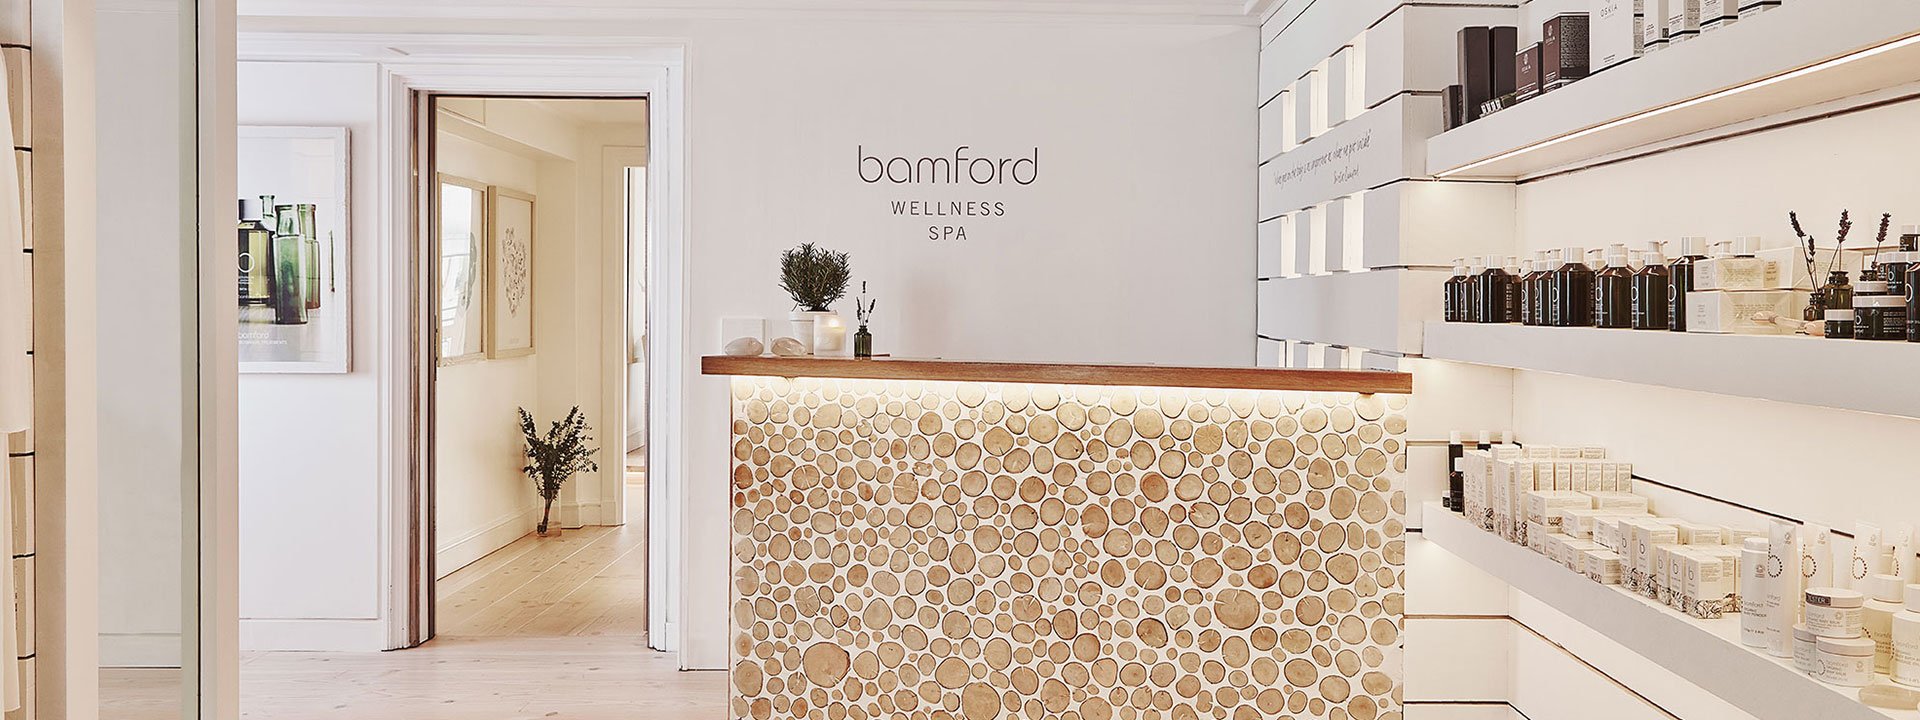 A light-filled space at The Bamford Wellness Spa at The Berkeley, with an array of spa treatment products.